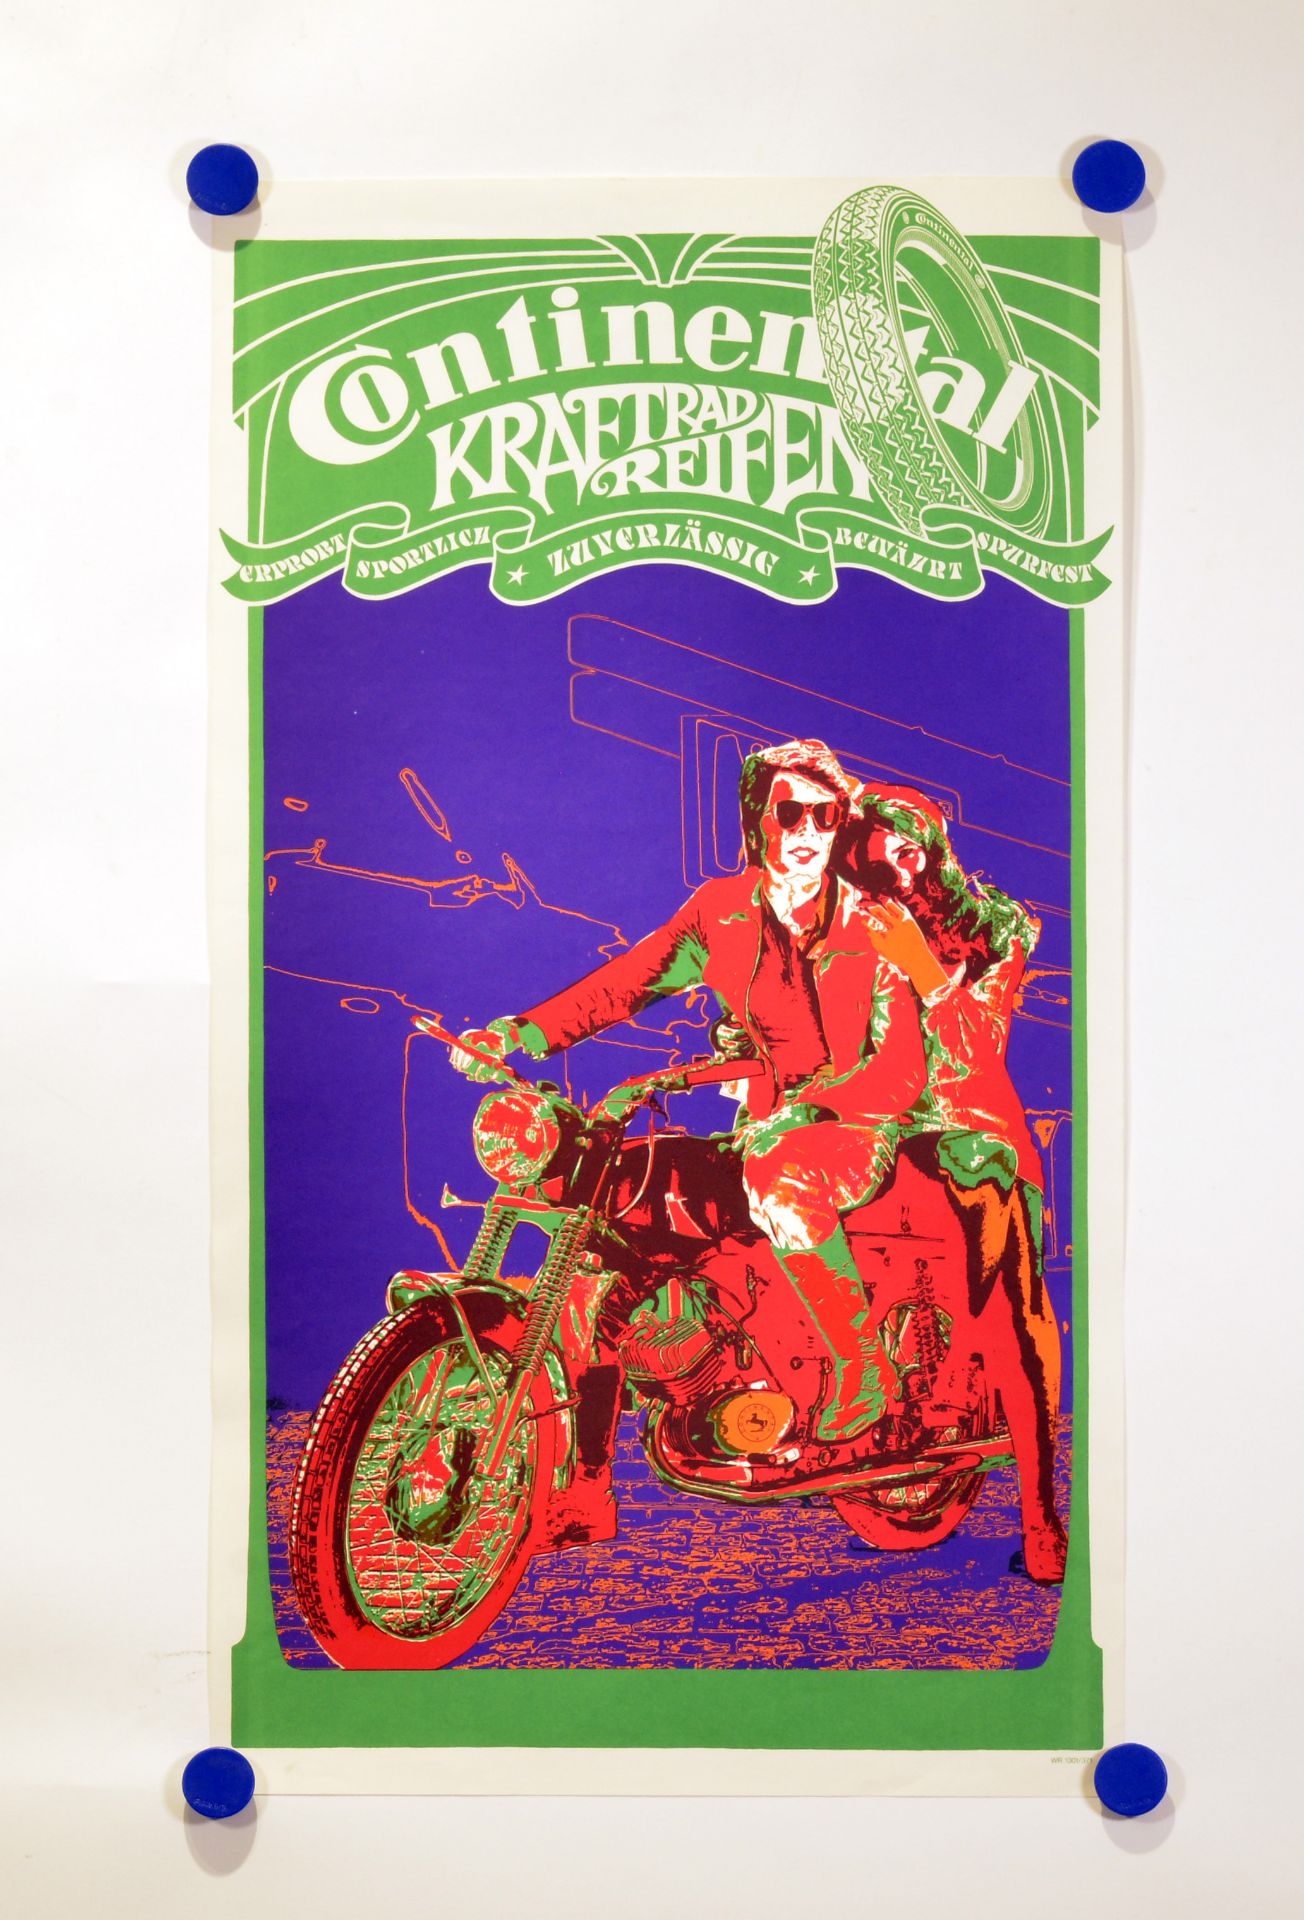 2 posters, Continental, psychedelic posters, 1970s, typical style of this time, 47.5 x 83.5 cm